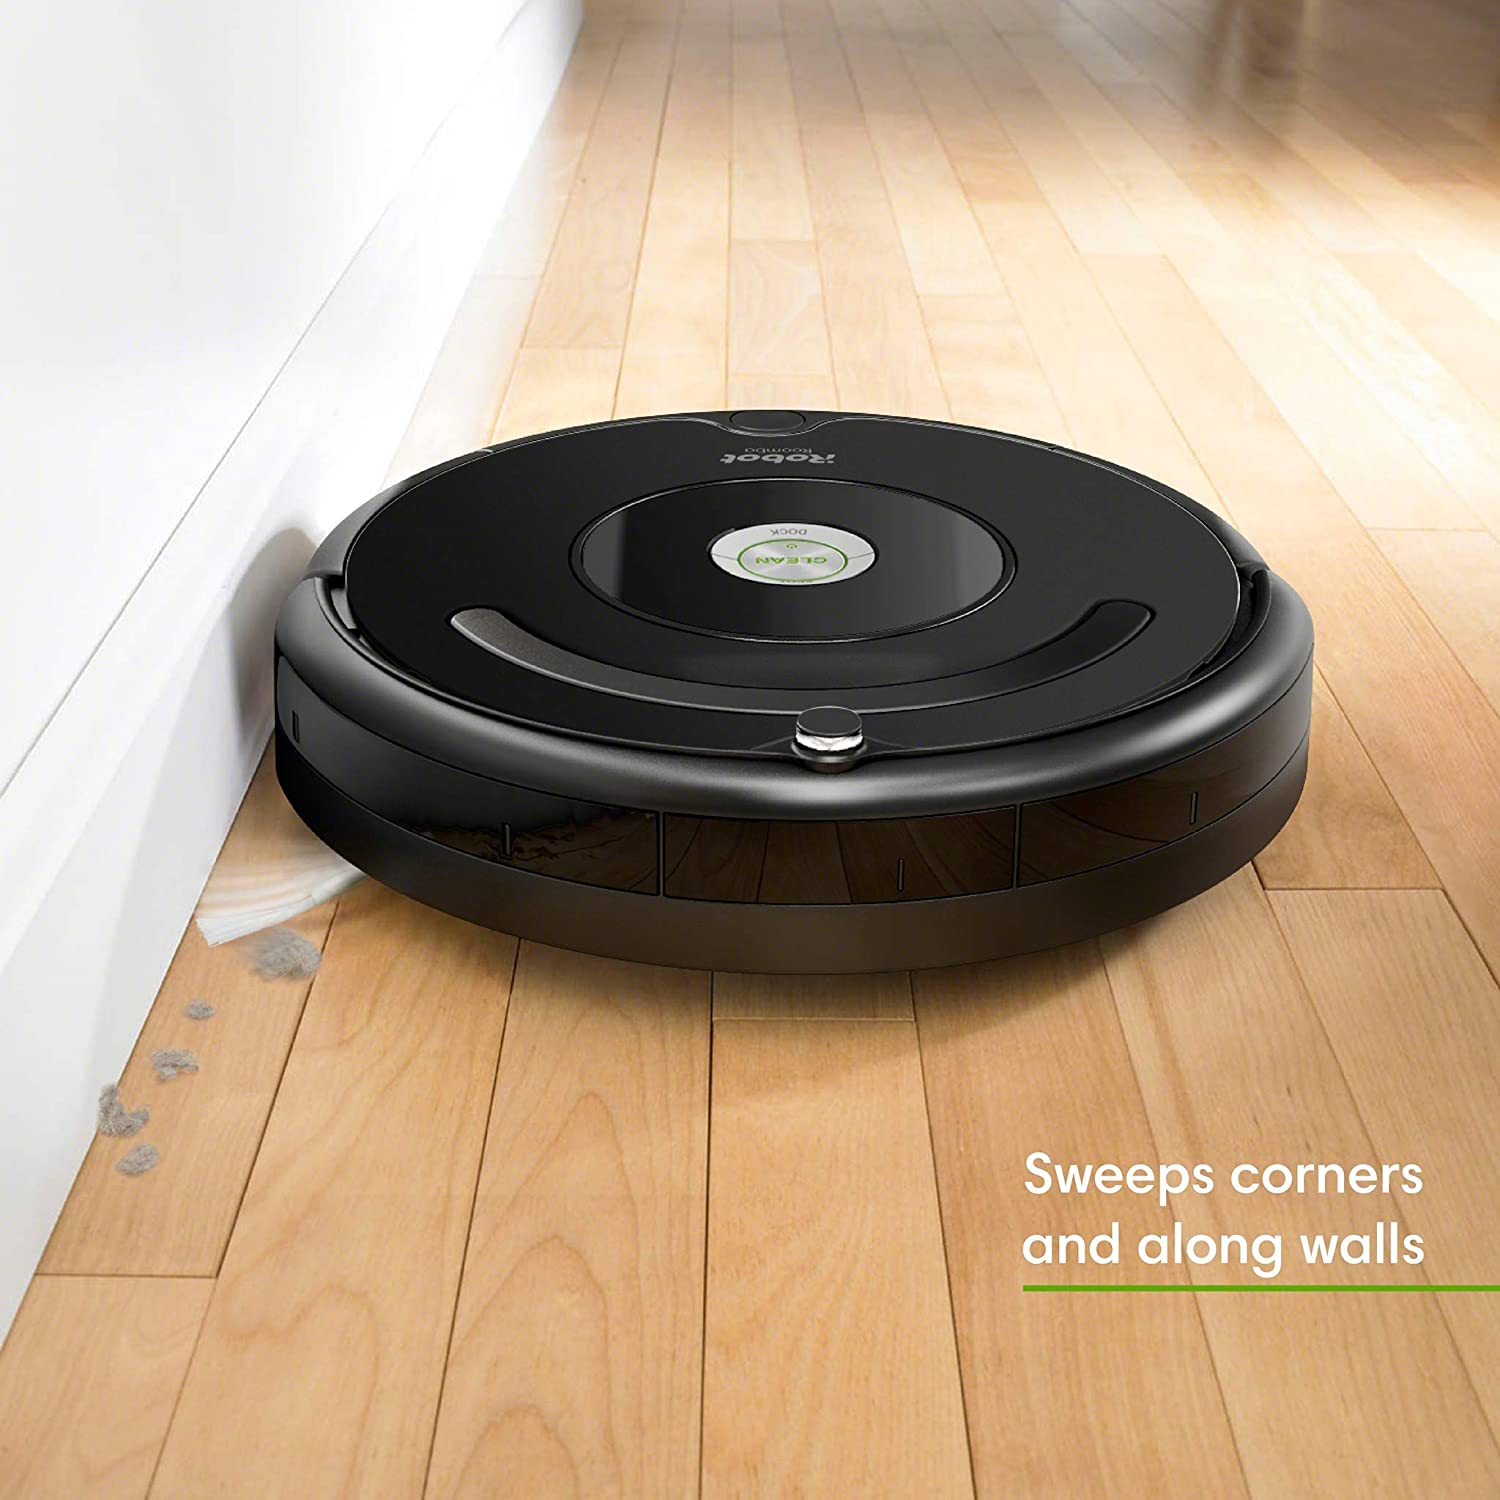 iRobot Roomba 675 Robot Vacuum-Wi-Fi Connectivity, Works with Alexa, Good for Pet Hair, Carpets, Hard Floors, Self-Charging - image 2 of 9